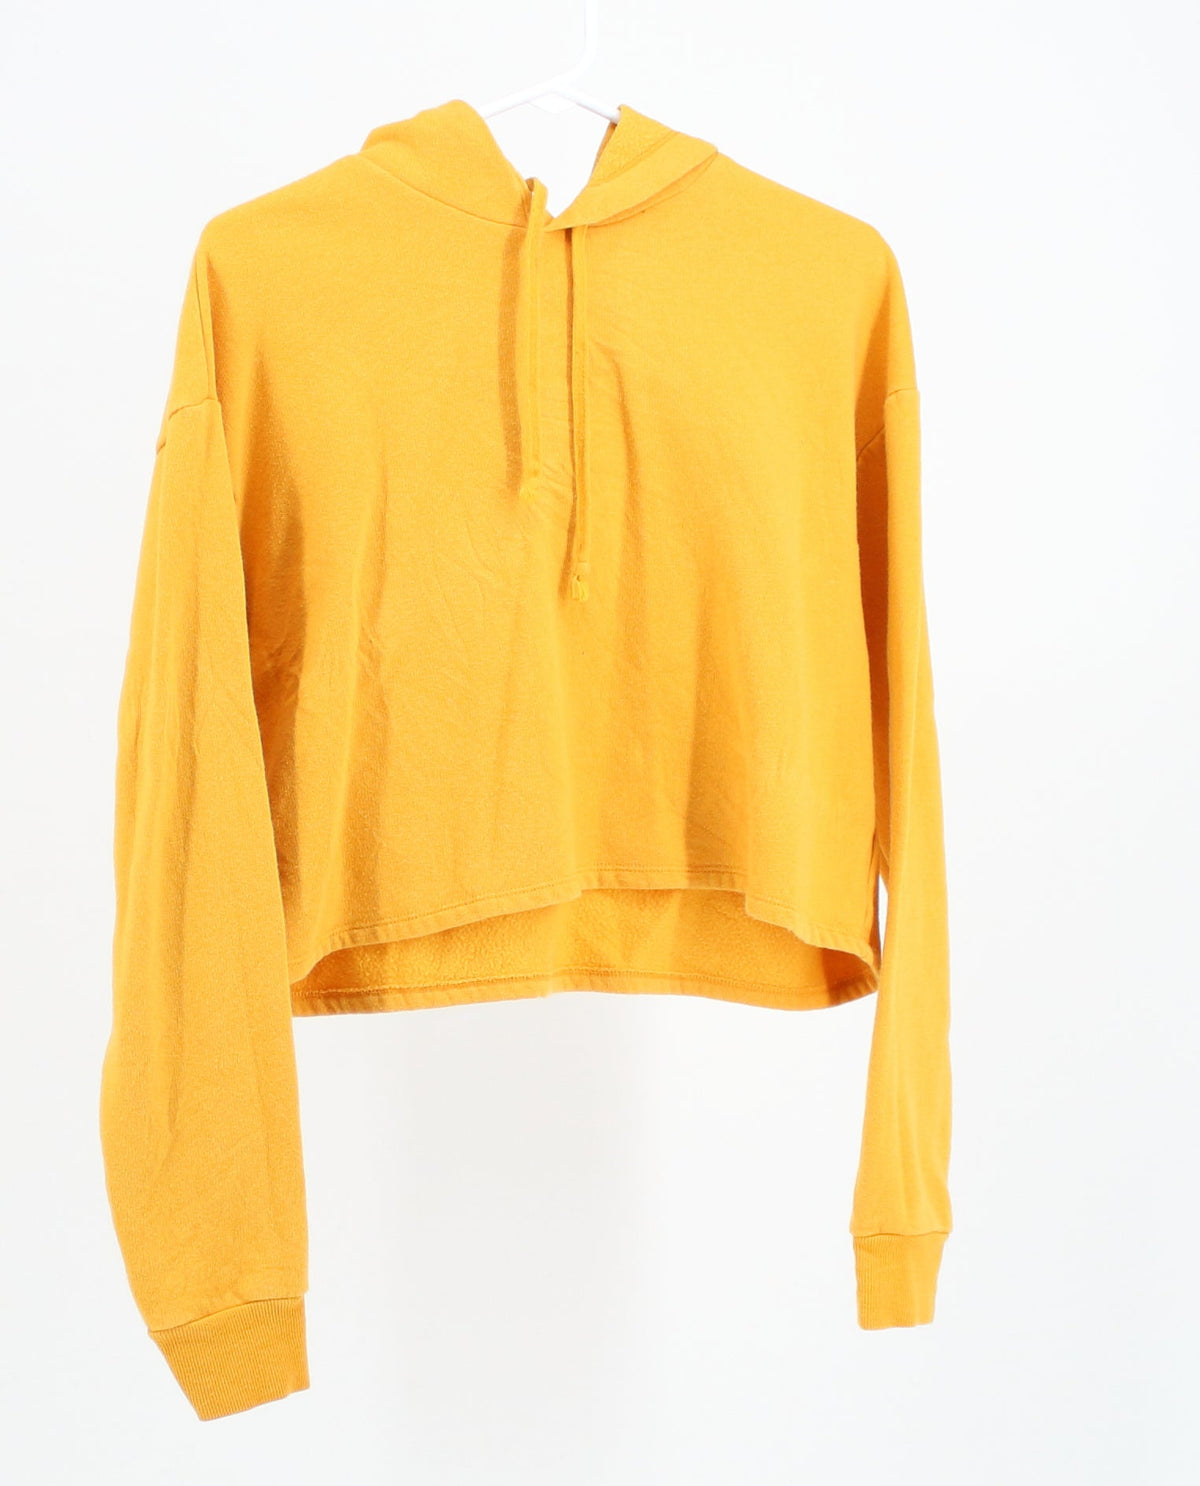 H&M DIVIDED Basic Mustard Yellow Cropped Hoodie